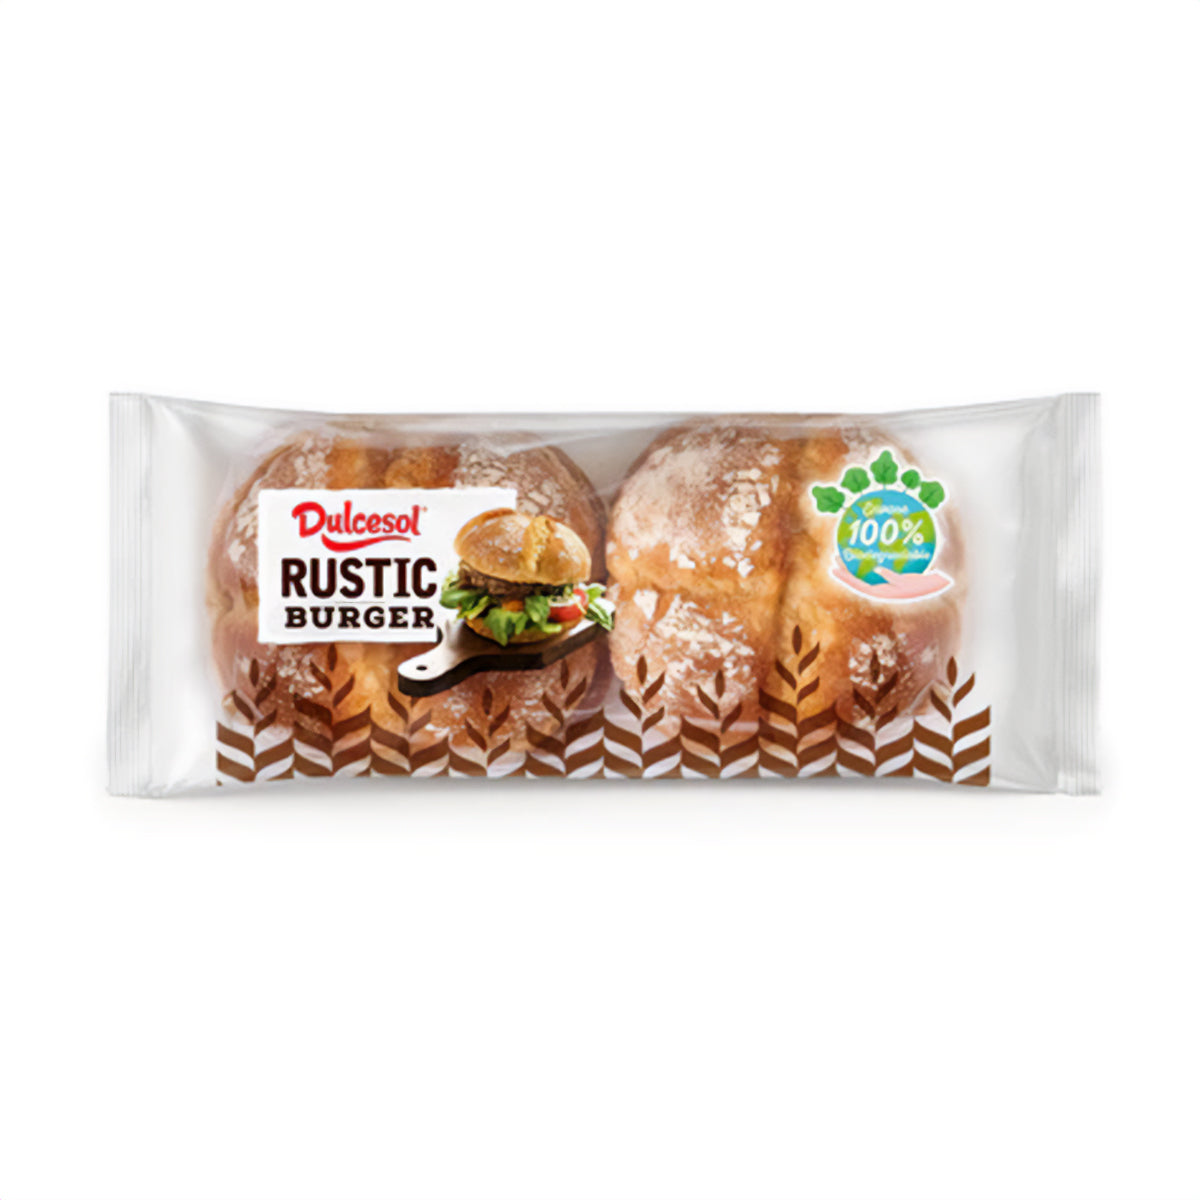 A package of Dulcesol - Rustic Burger Buns - 309g on a white background.